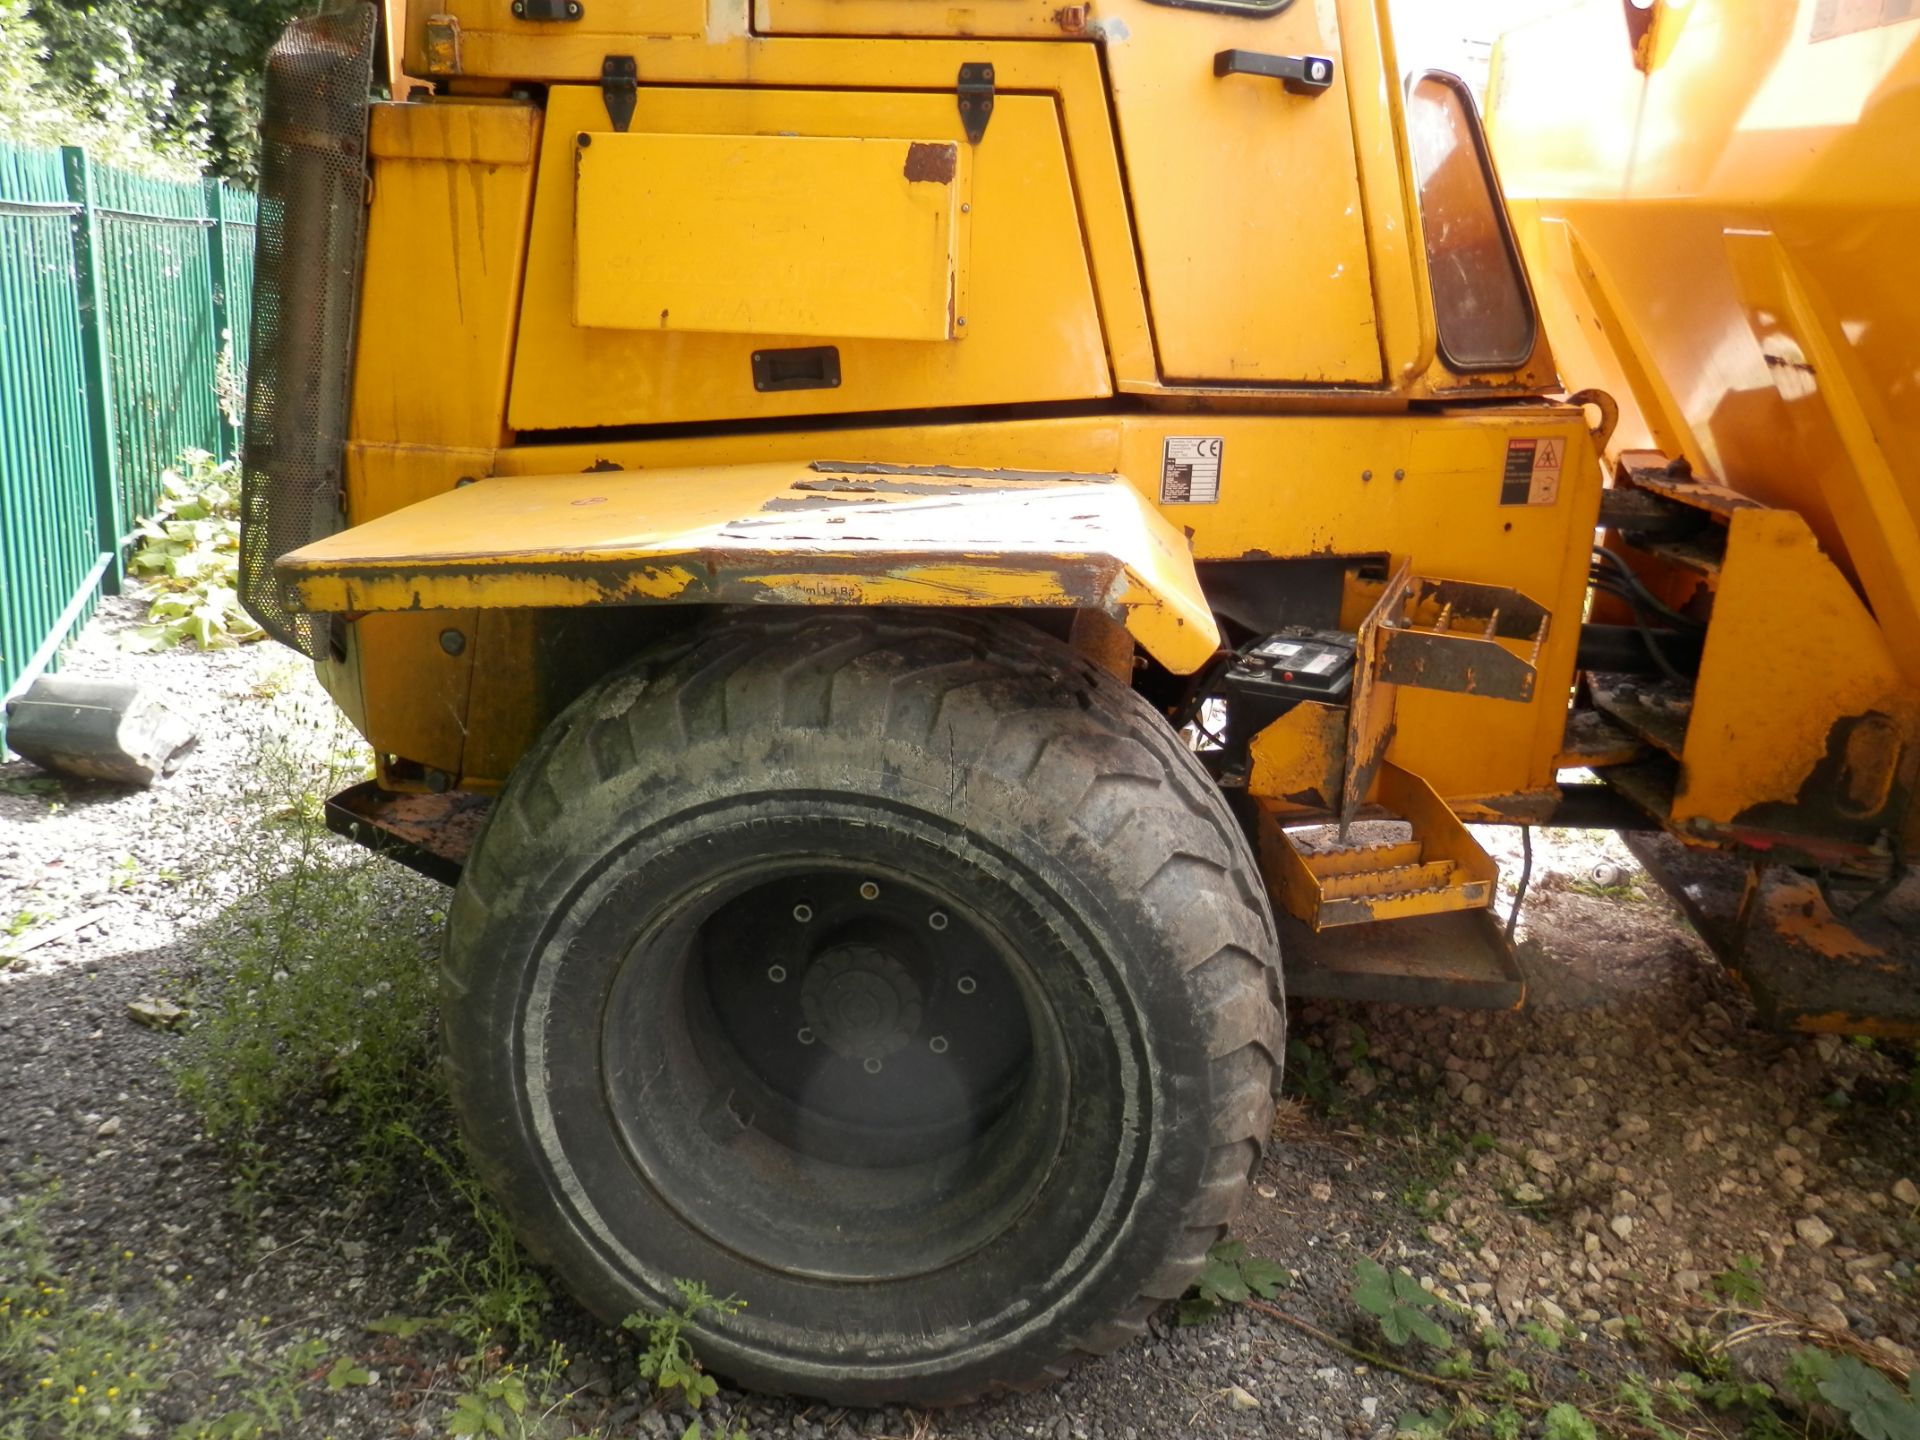 RARE 2005 THWAITES ENCLOSED CAB 5 TONNE DUMPER TRUCK, EX WATER BOARD. ALL WORKING. - Image 6 of 8